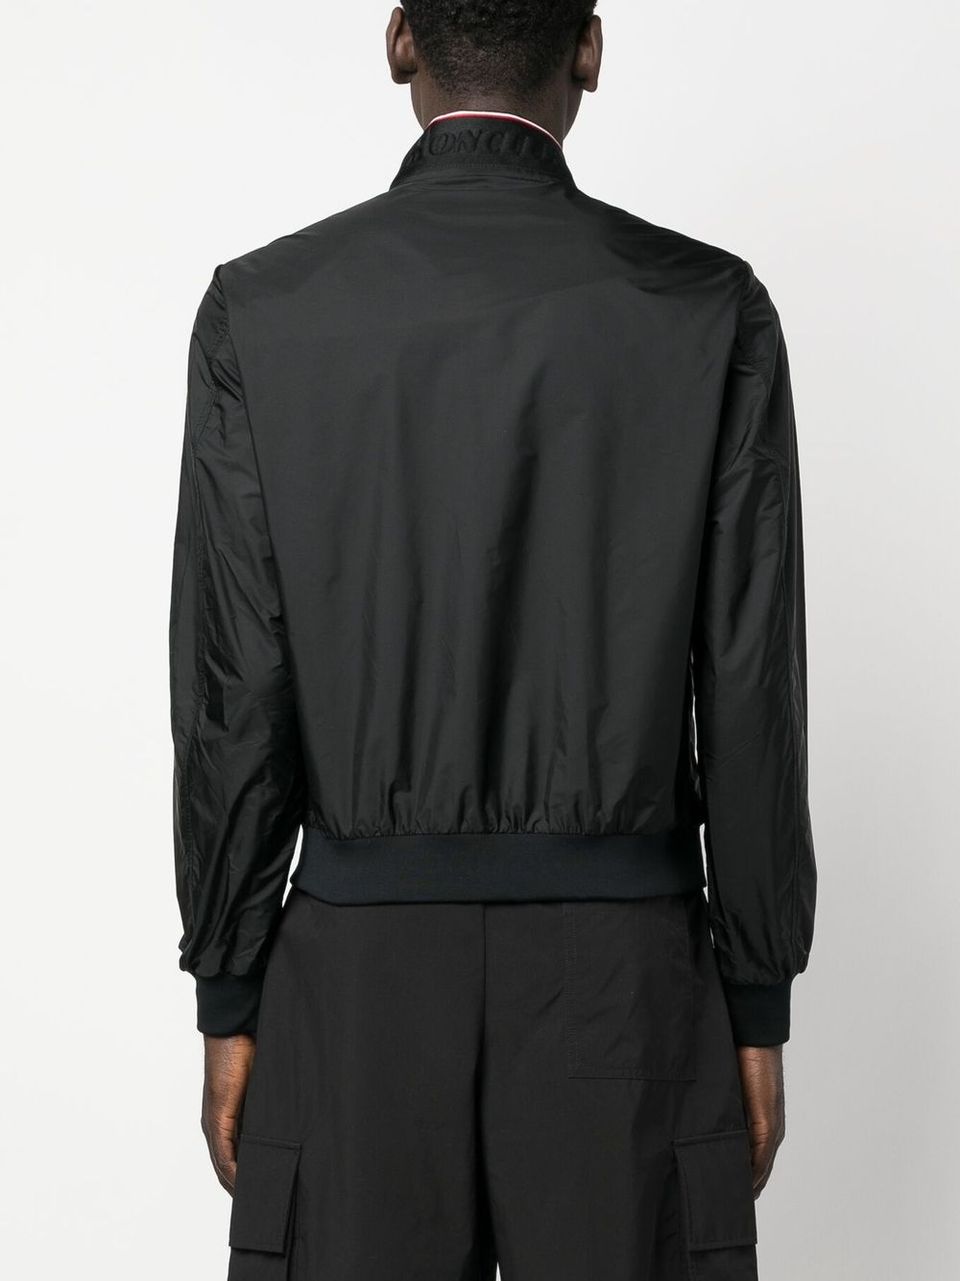 'Reppe' jacket